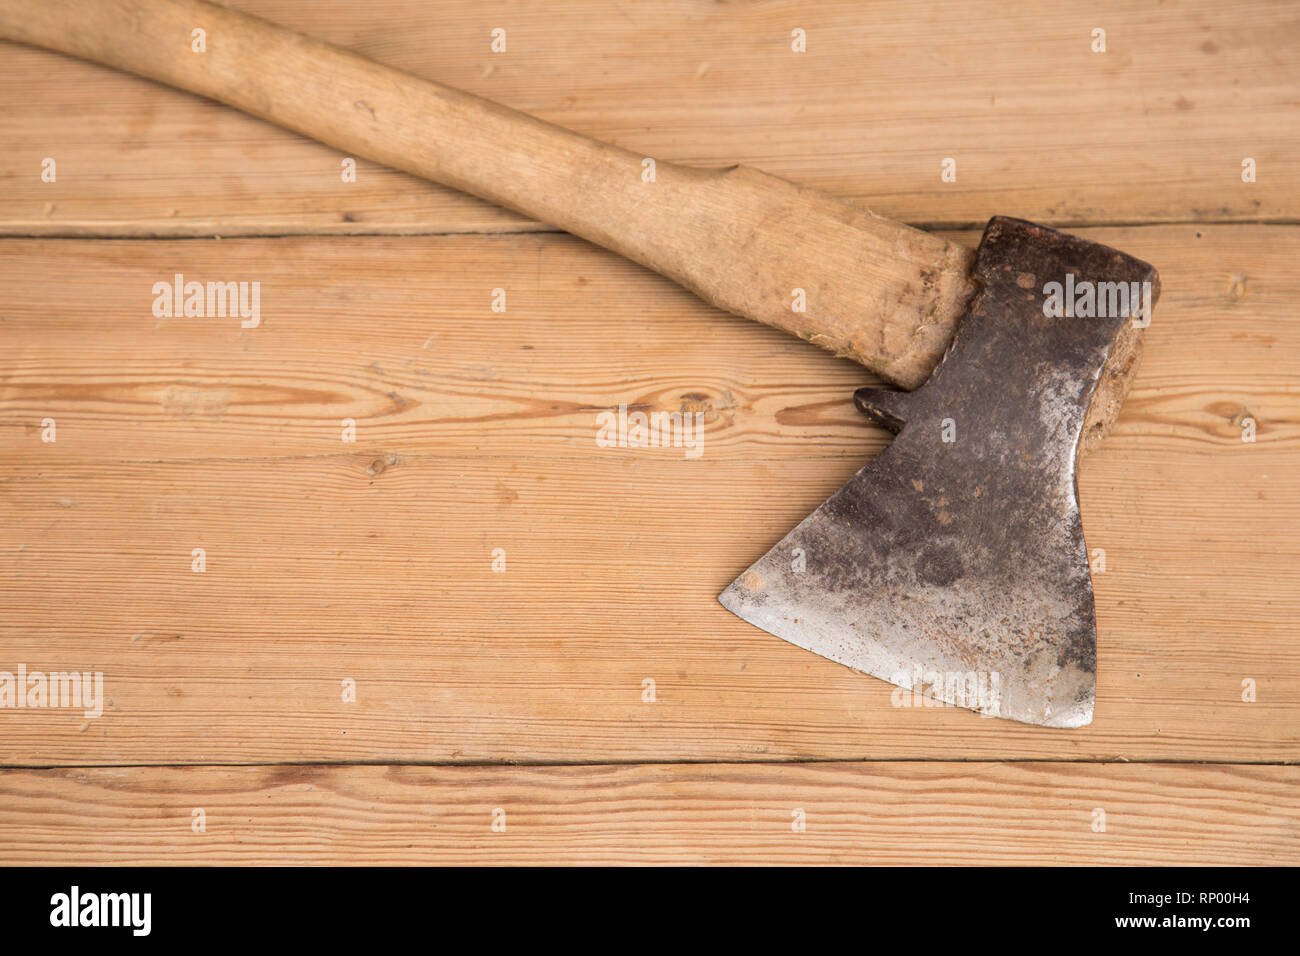 Old ax with a wooden handle stuck in wooden log. Concept for woodworking or deforestation. Selective focus. Stock Photo